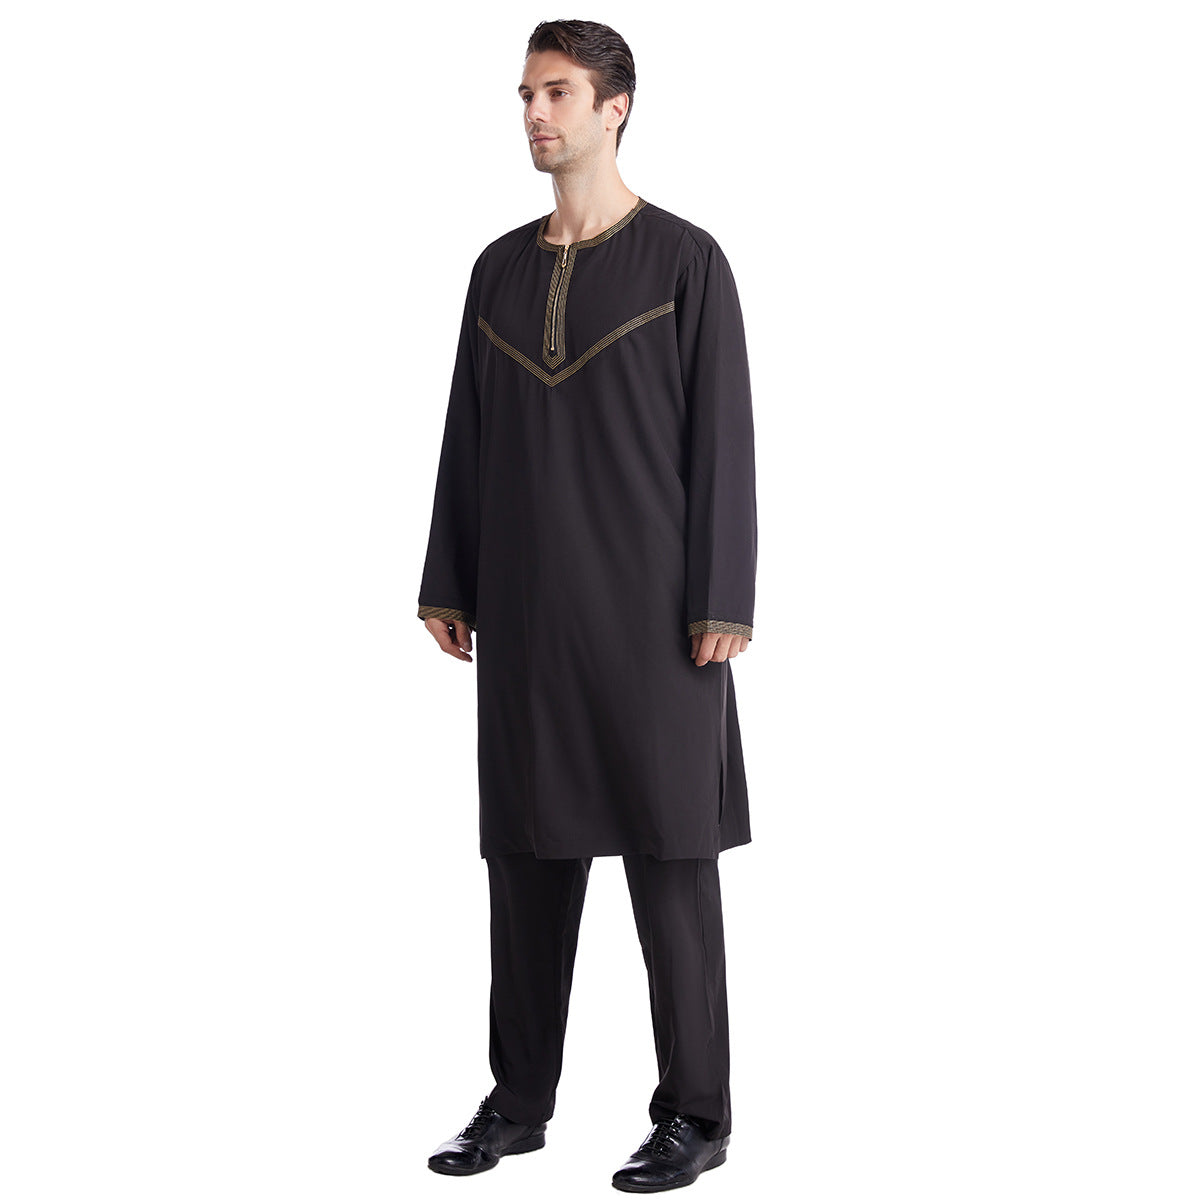 Meditation Long Dress For Men - 2 pieces set of Polo style Arab Morocco men dress - Personal Hour for Yoga and Meditations 